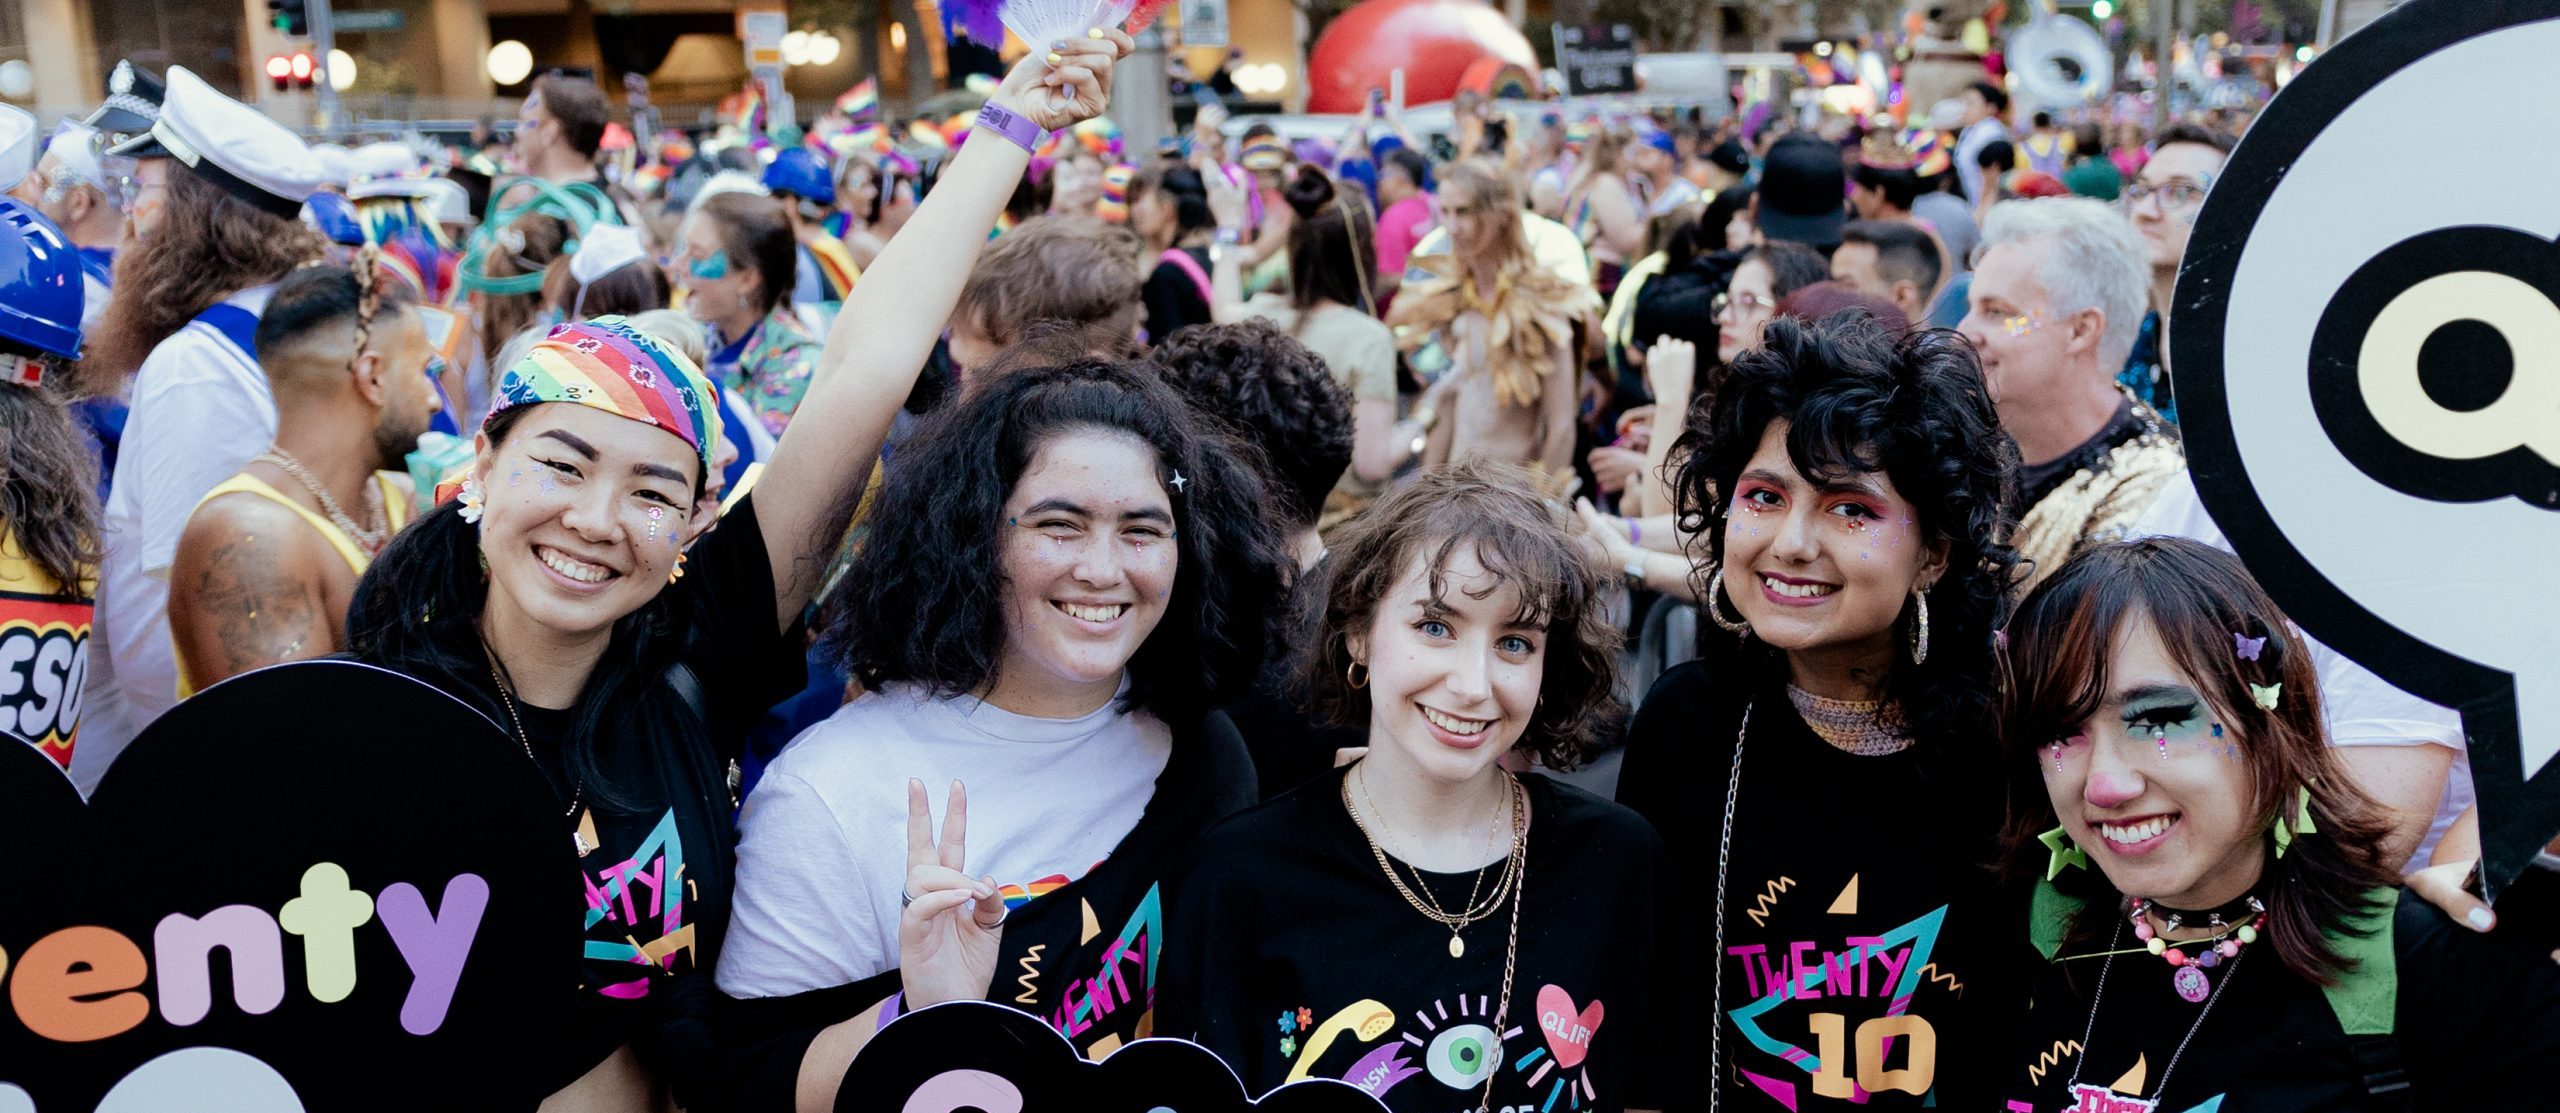 A photo of five young people wearing black tshirts with designs featuring Twenty10 in stylised text. They are dressed up in 80s style makeup and hair.